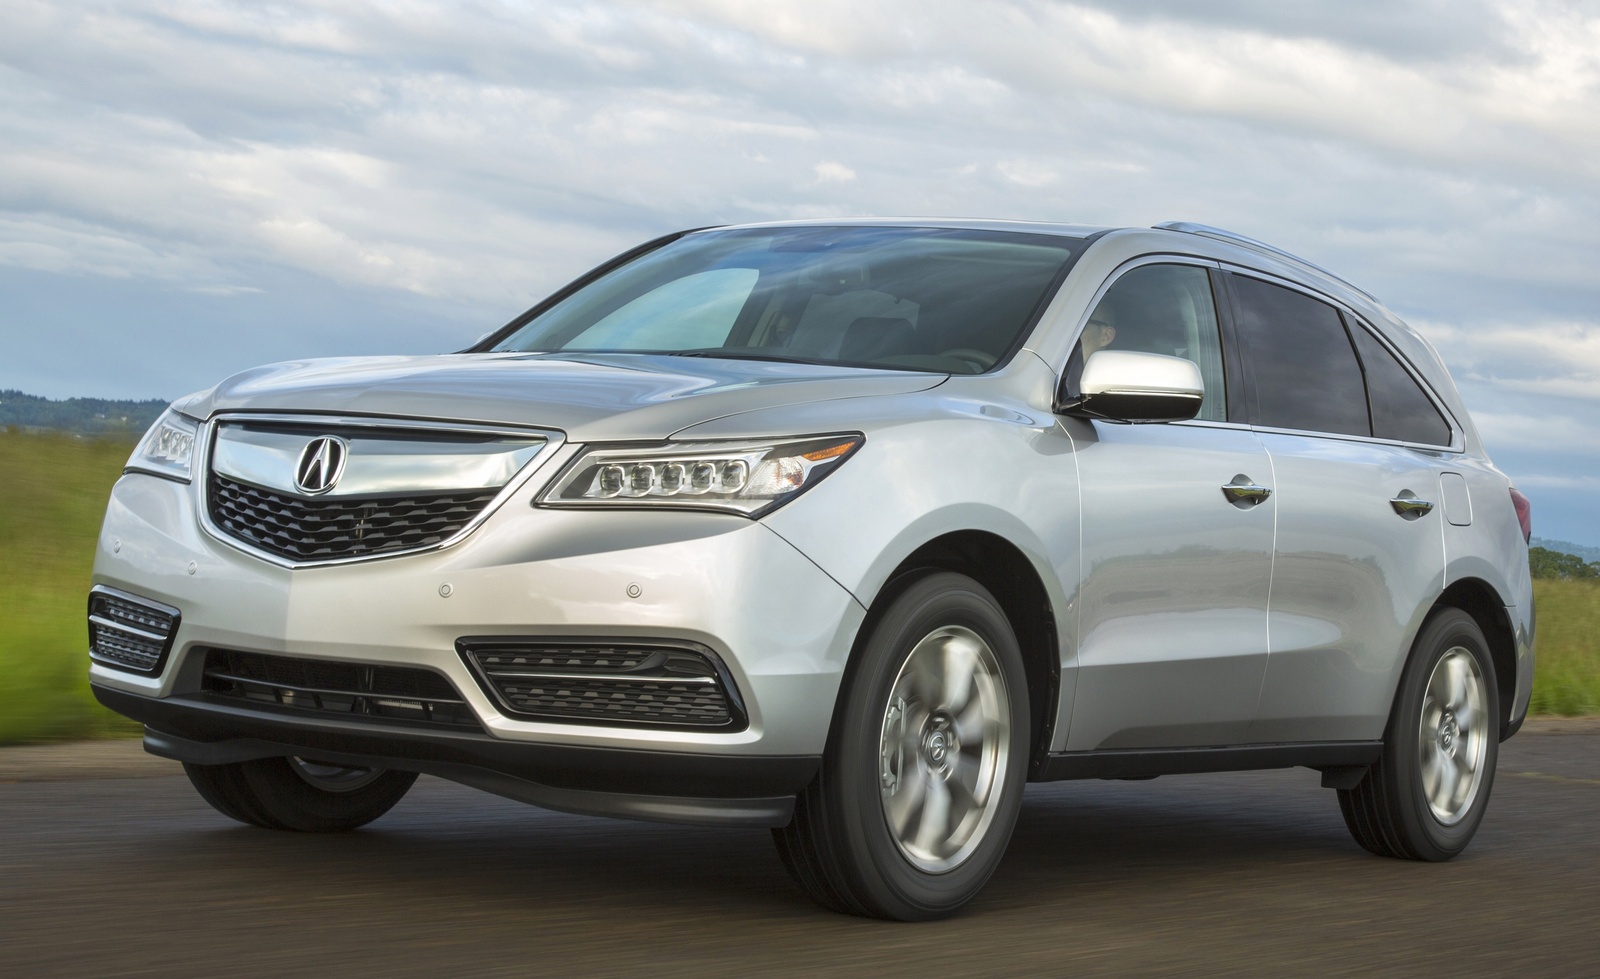 Home Research Acura Mdx Car Wallpaper